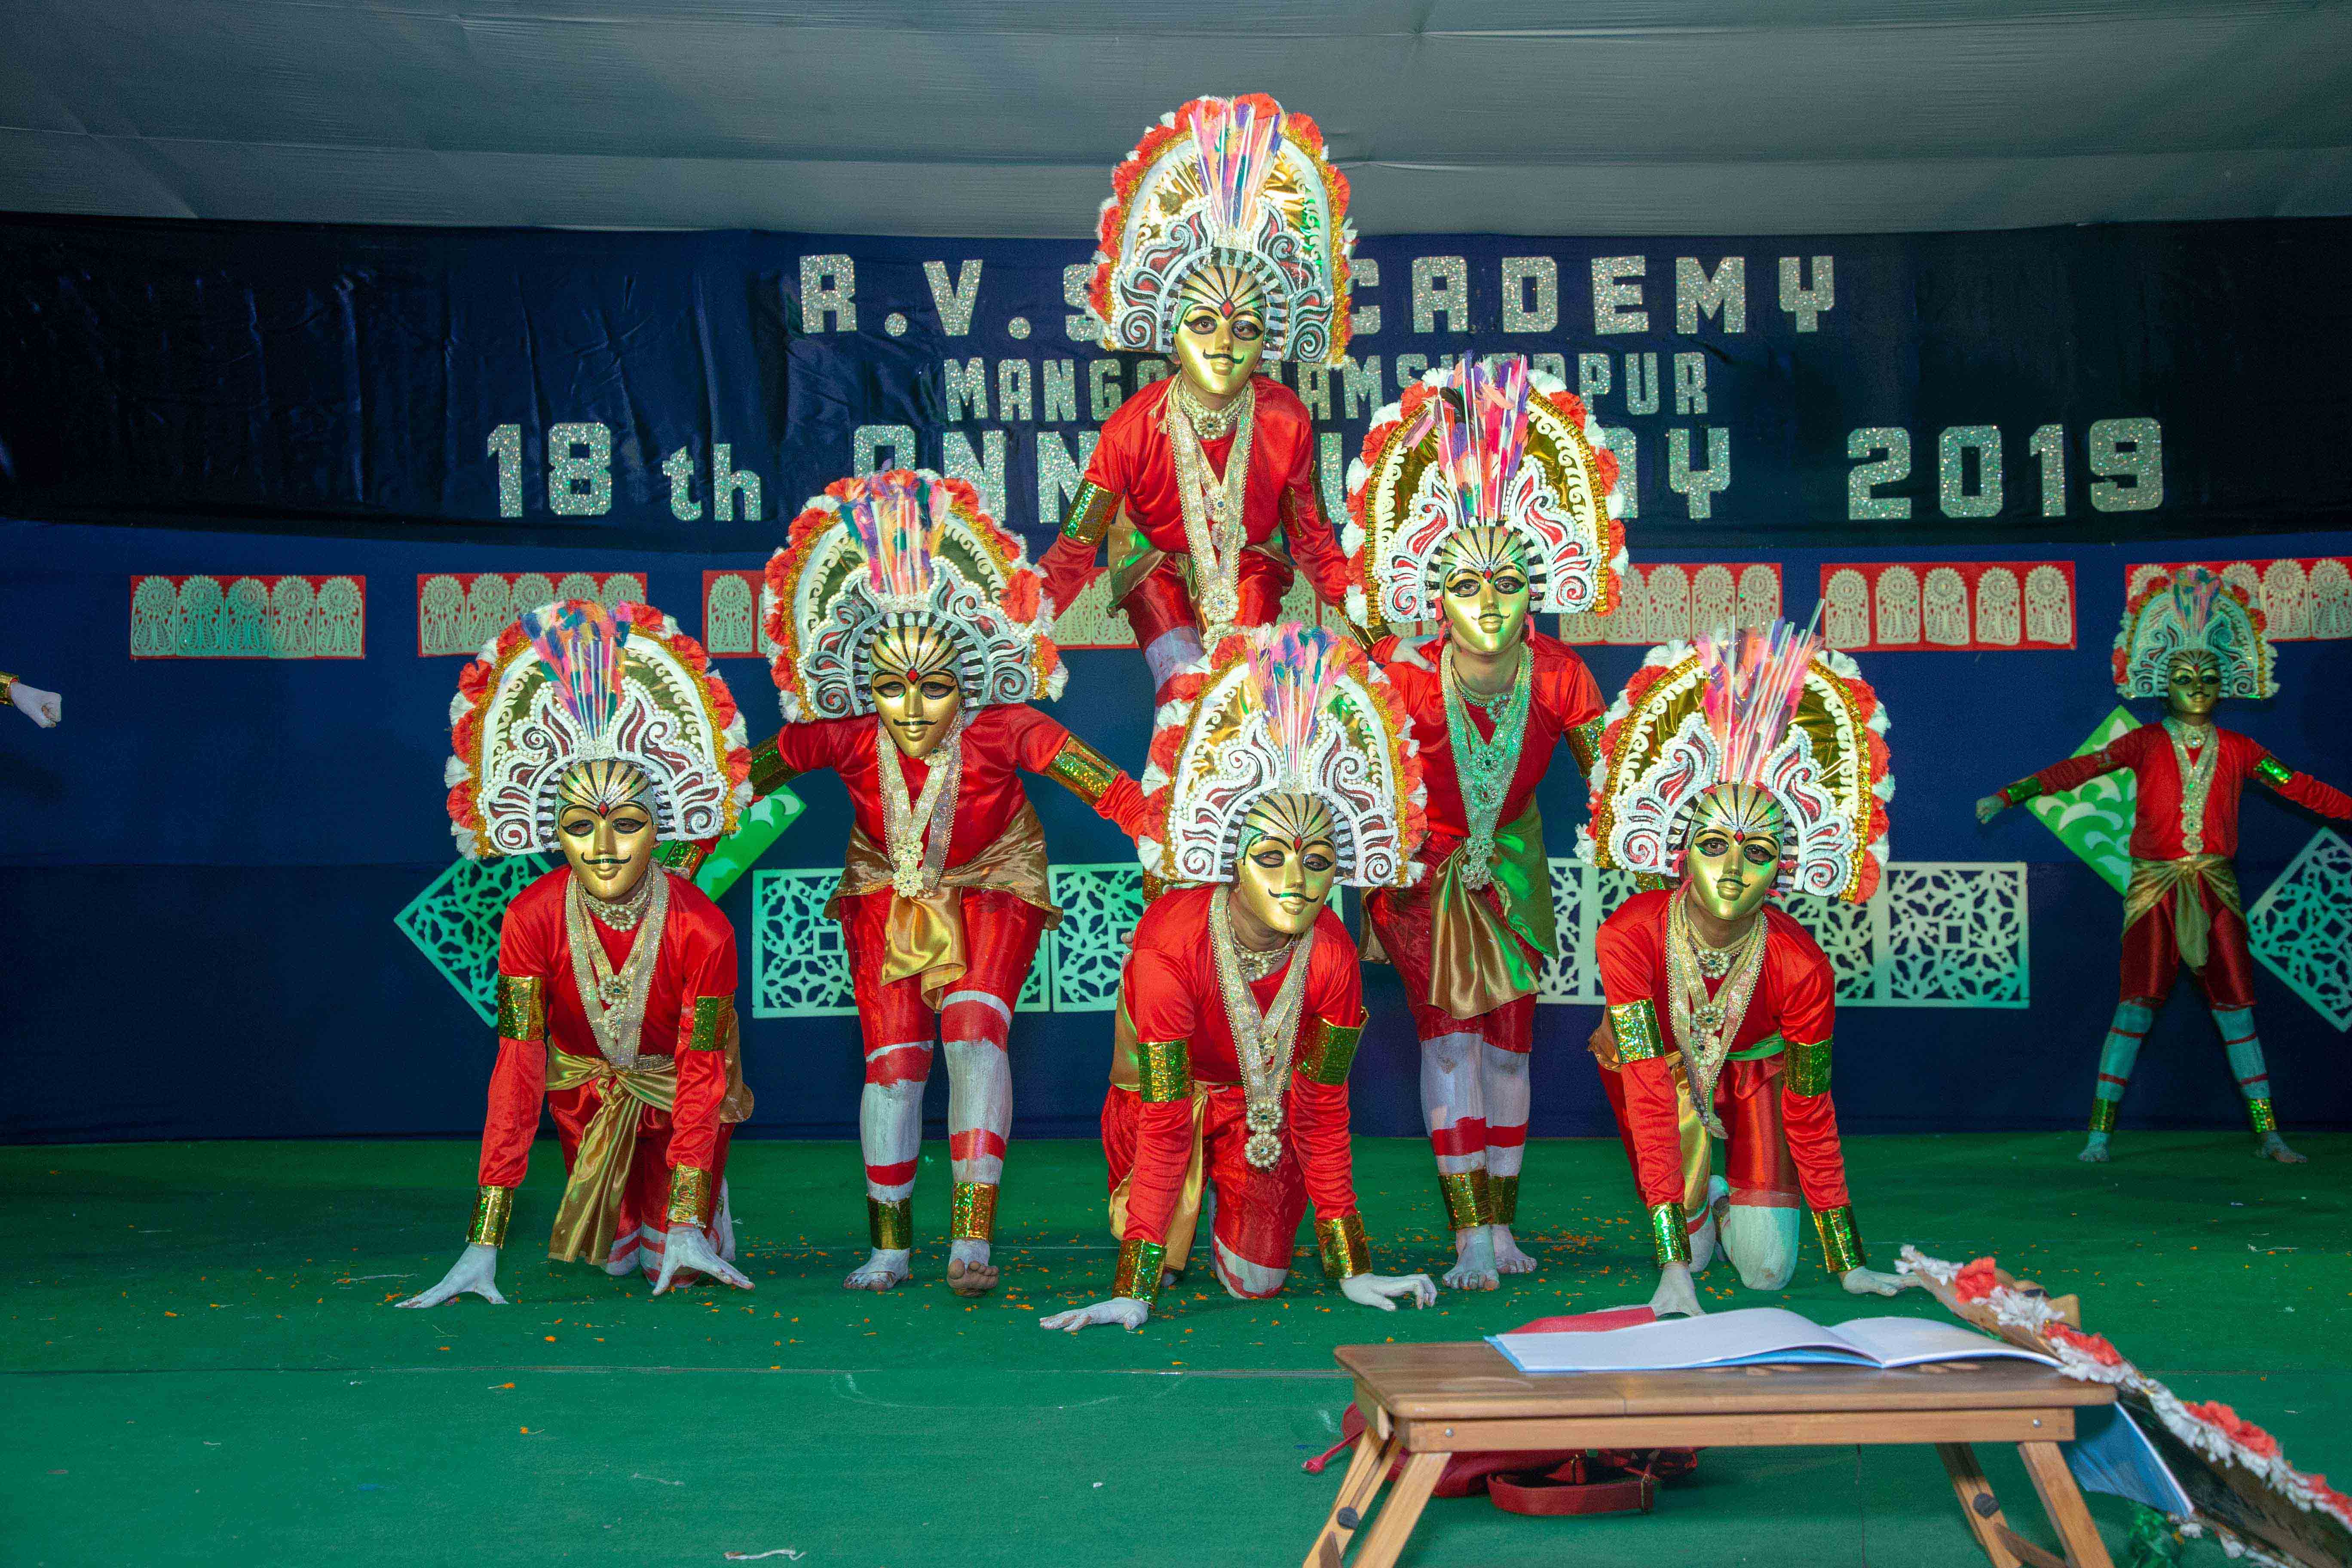 18th Annual Day at R.V.S Academy